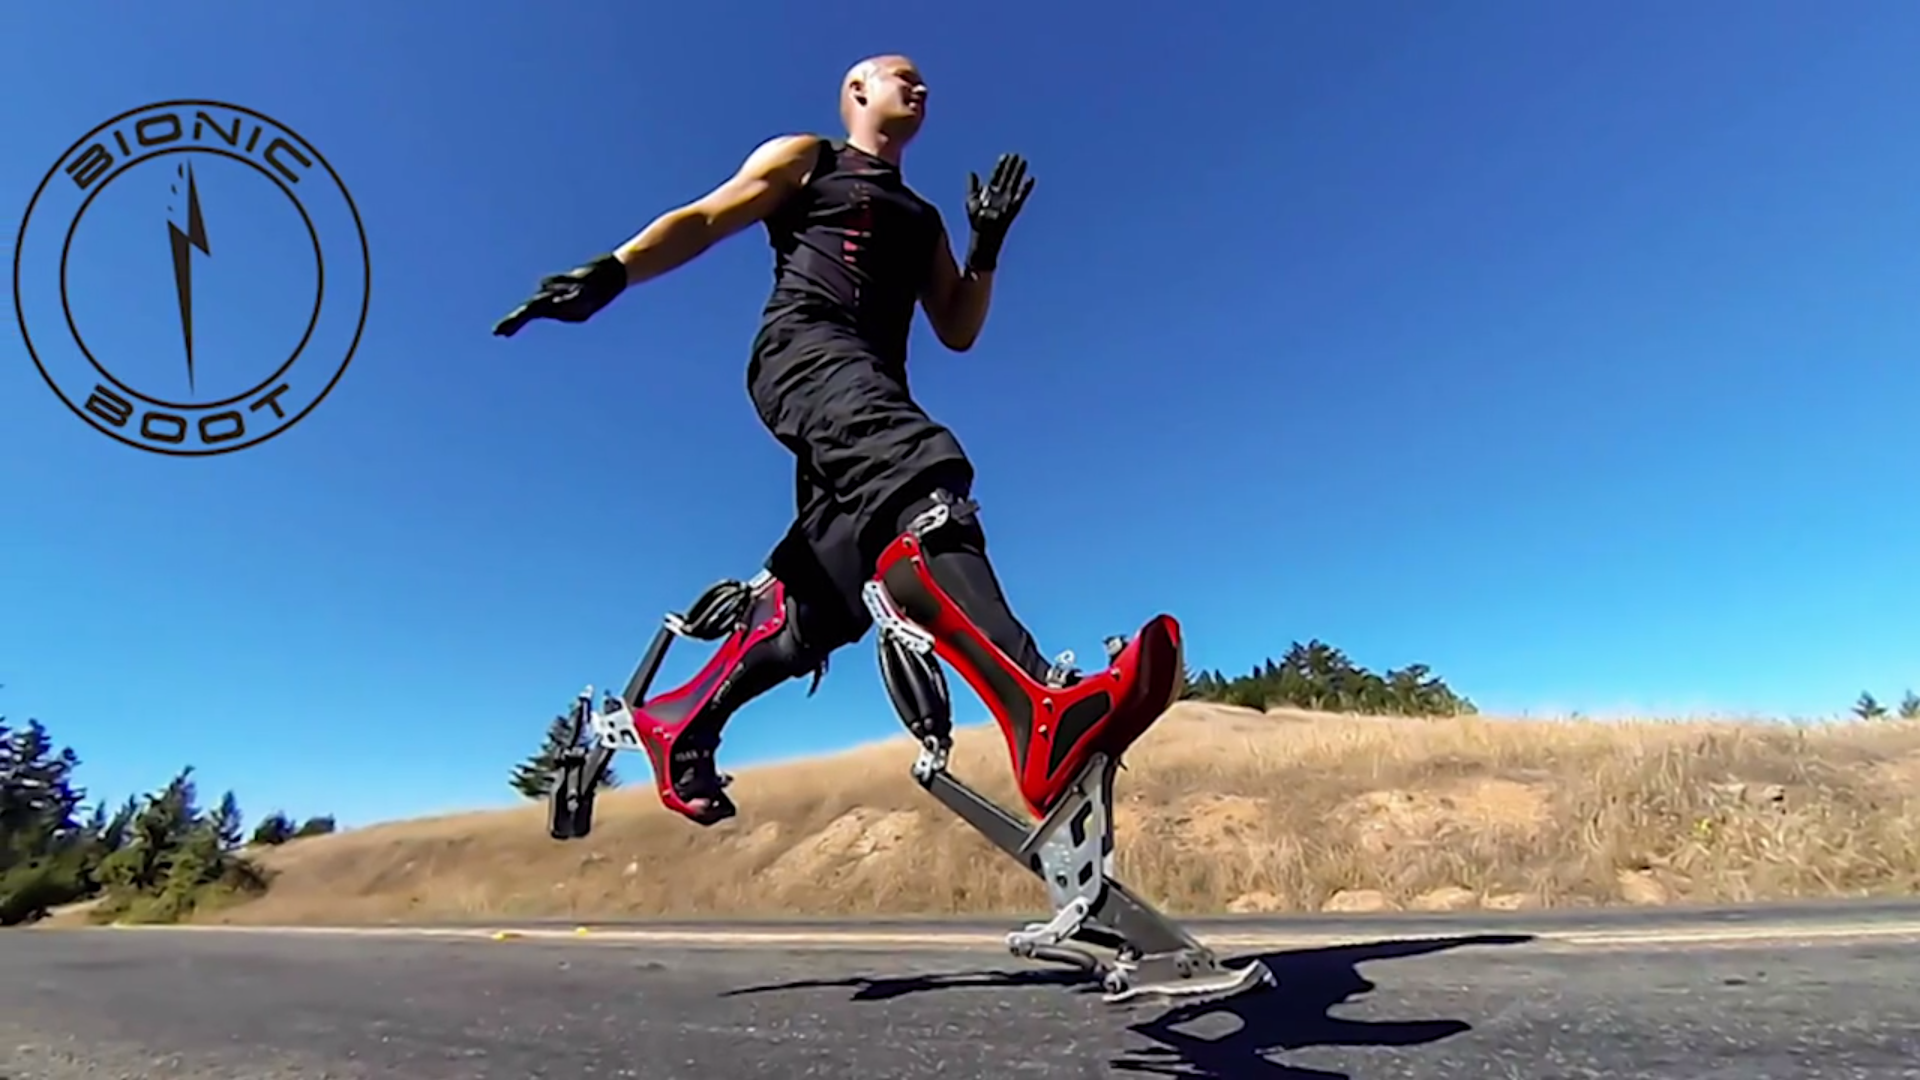 Video: Bionic Boots That Let You Run Up To 25 MPH